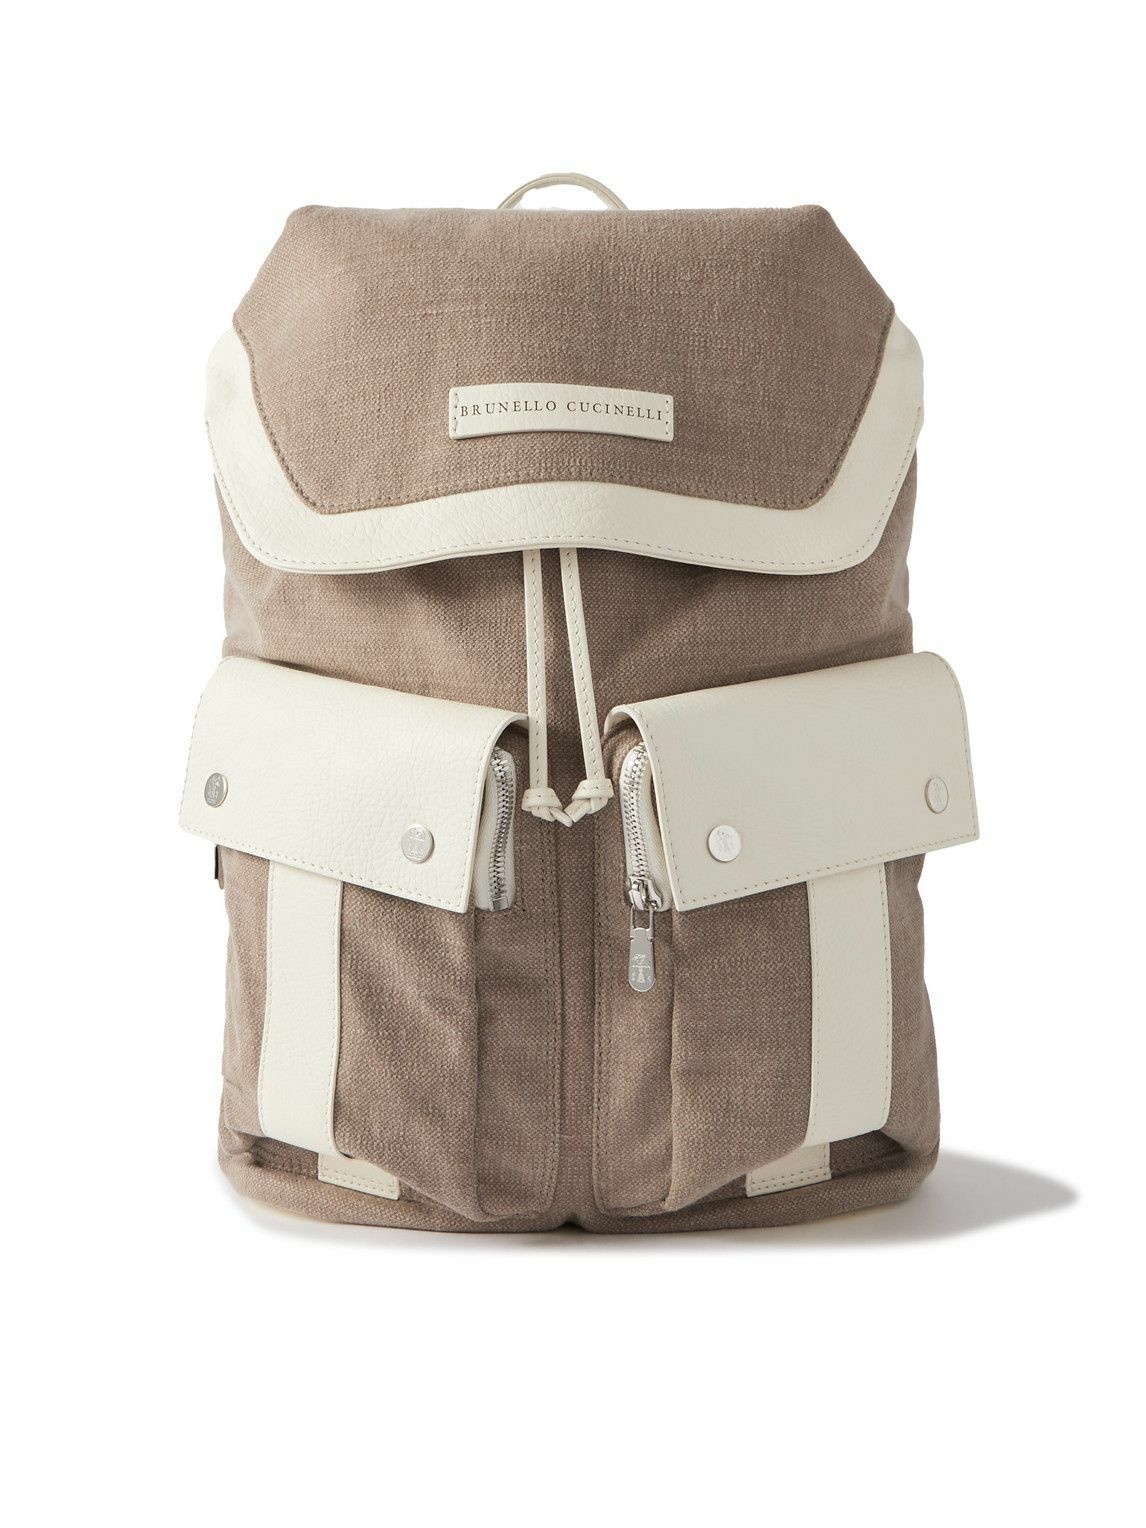 Photo: Brunello Cucinelli - Full-Grain Leather-Trimmed Cotton and Linen-Blend Canvas Backpack